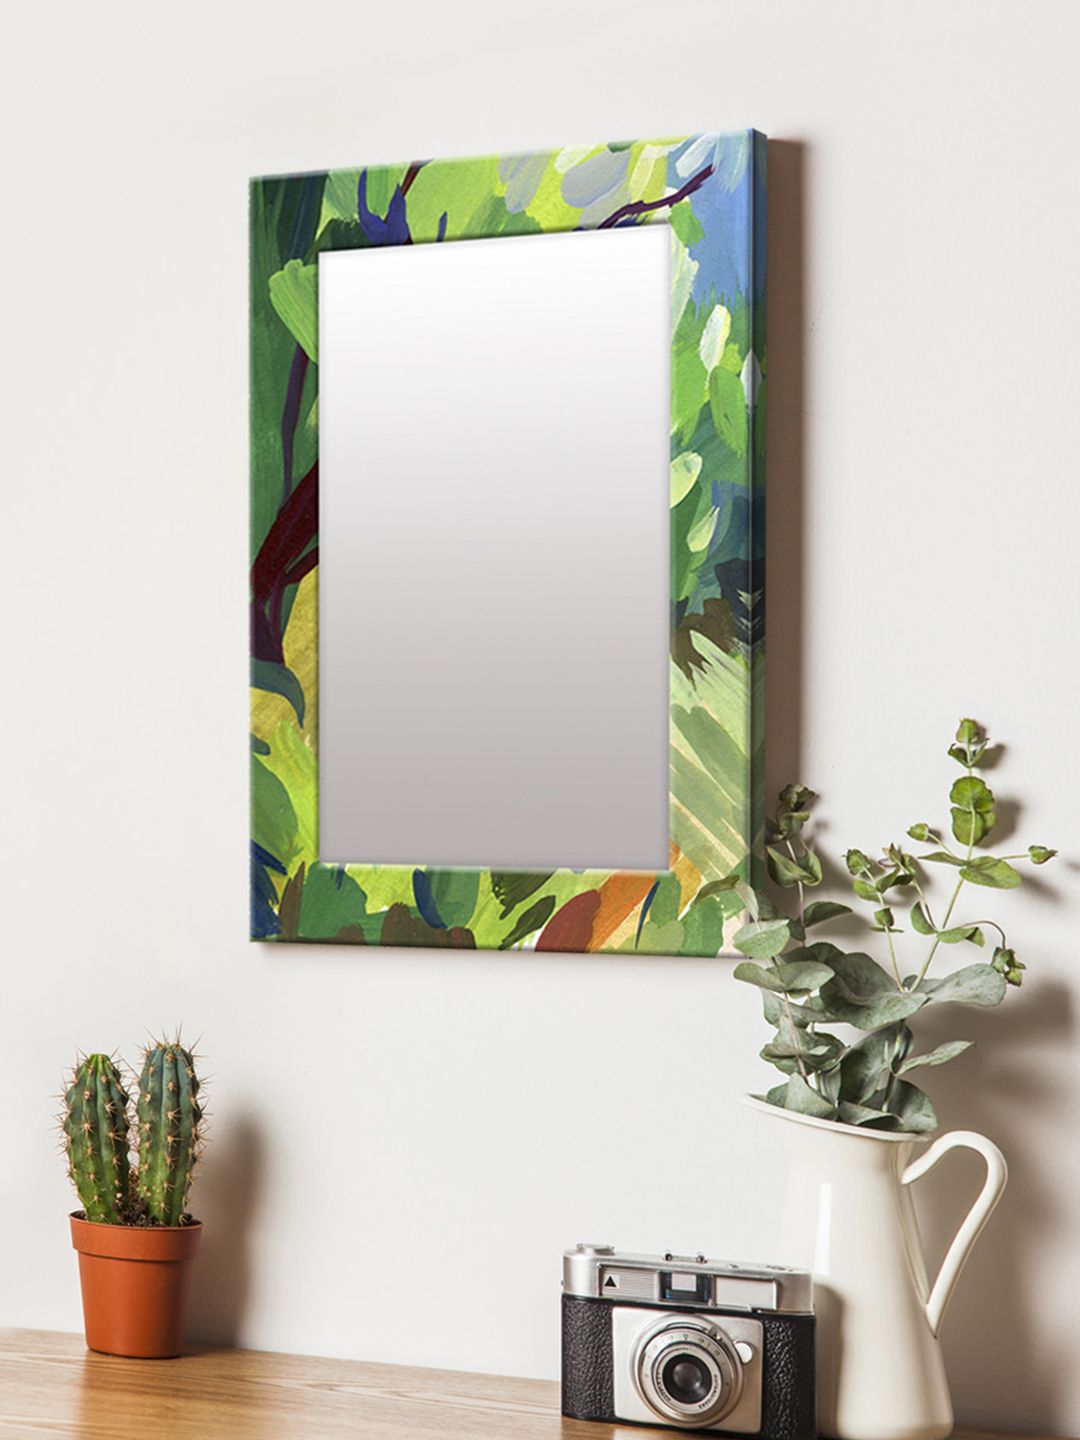 999Store Green Printed MDF Wall Mirror Price in India